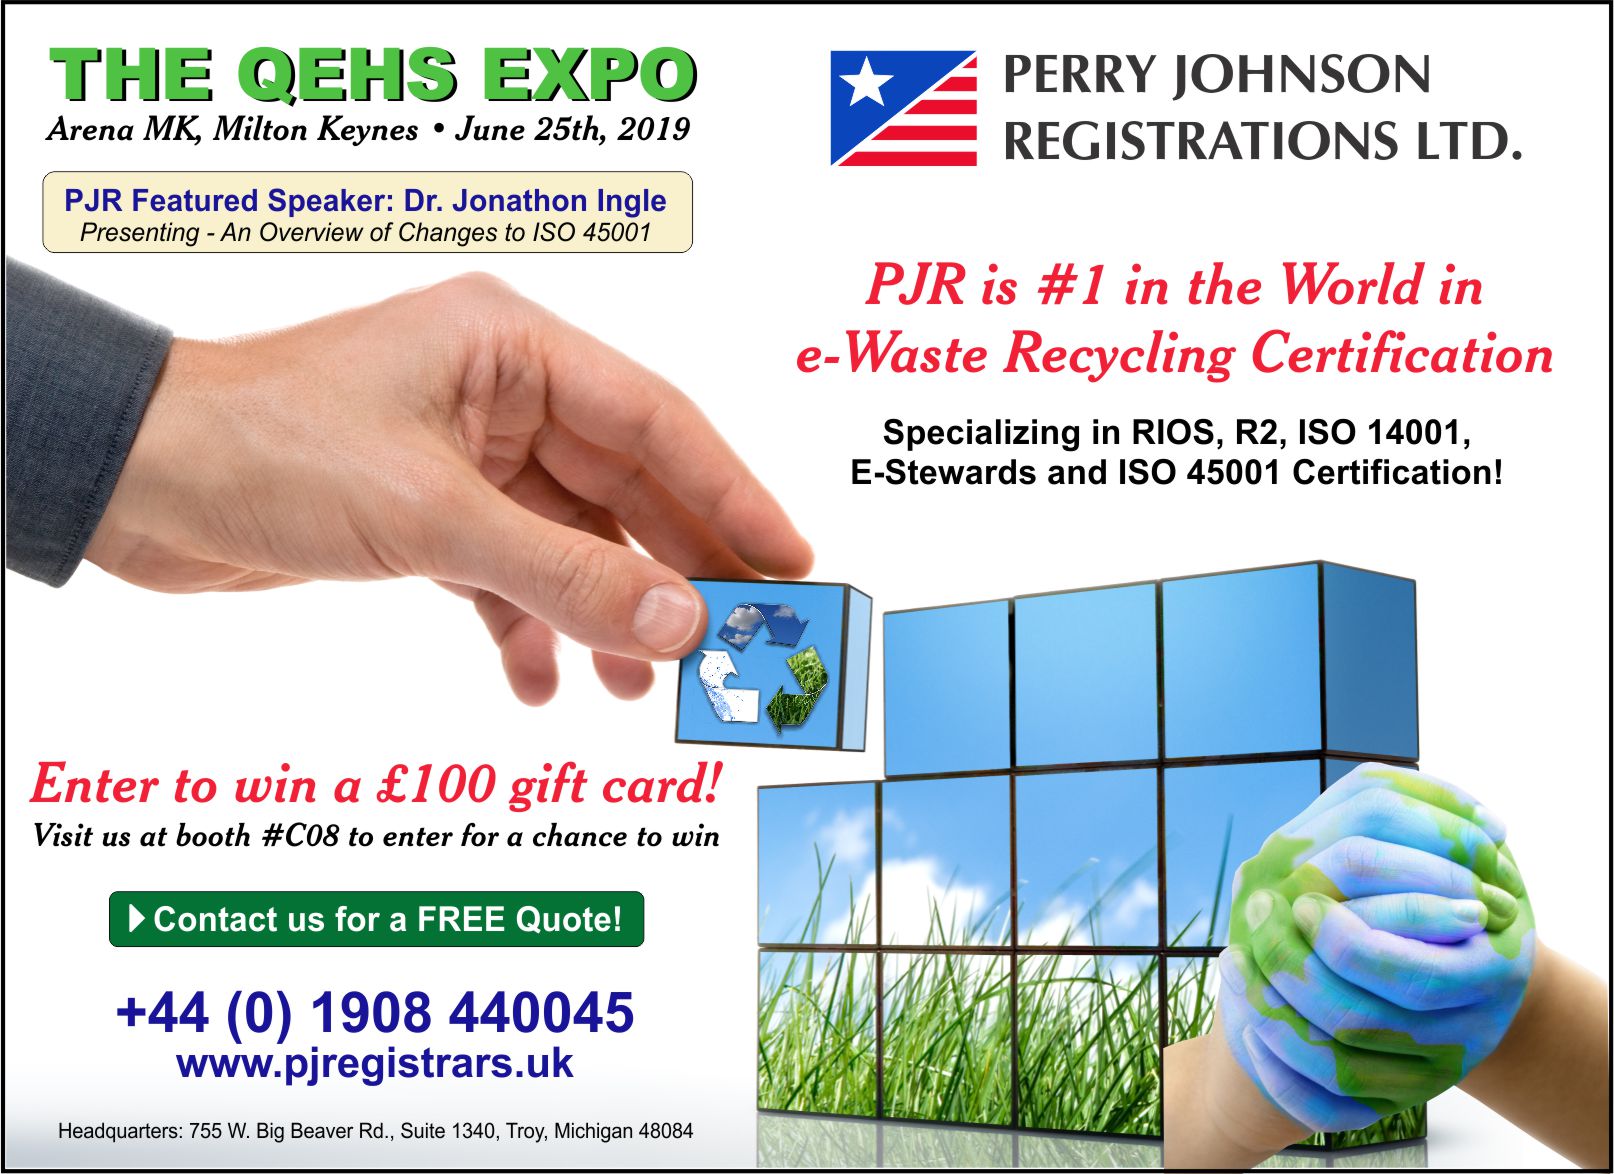 Free Quote with Perry Johnson Registrars Ltd.